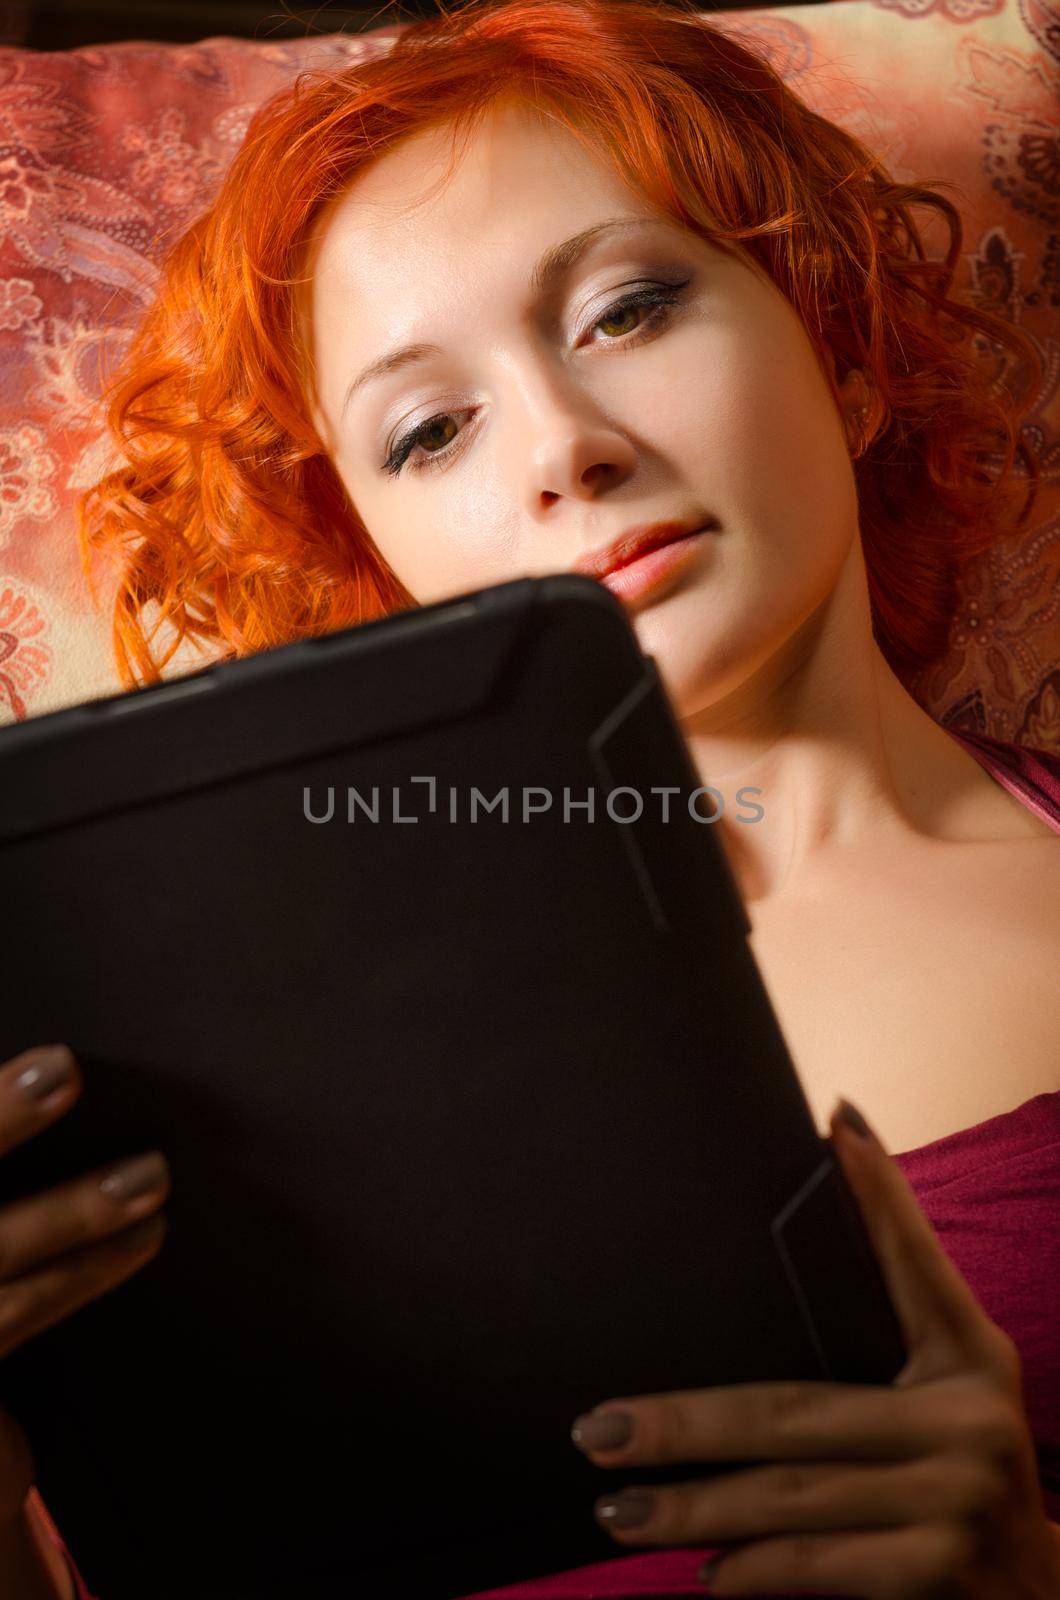 Young woman on a couch with tablet pc